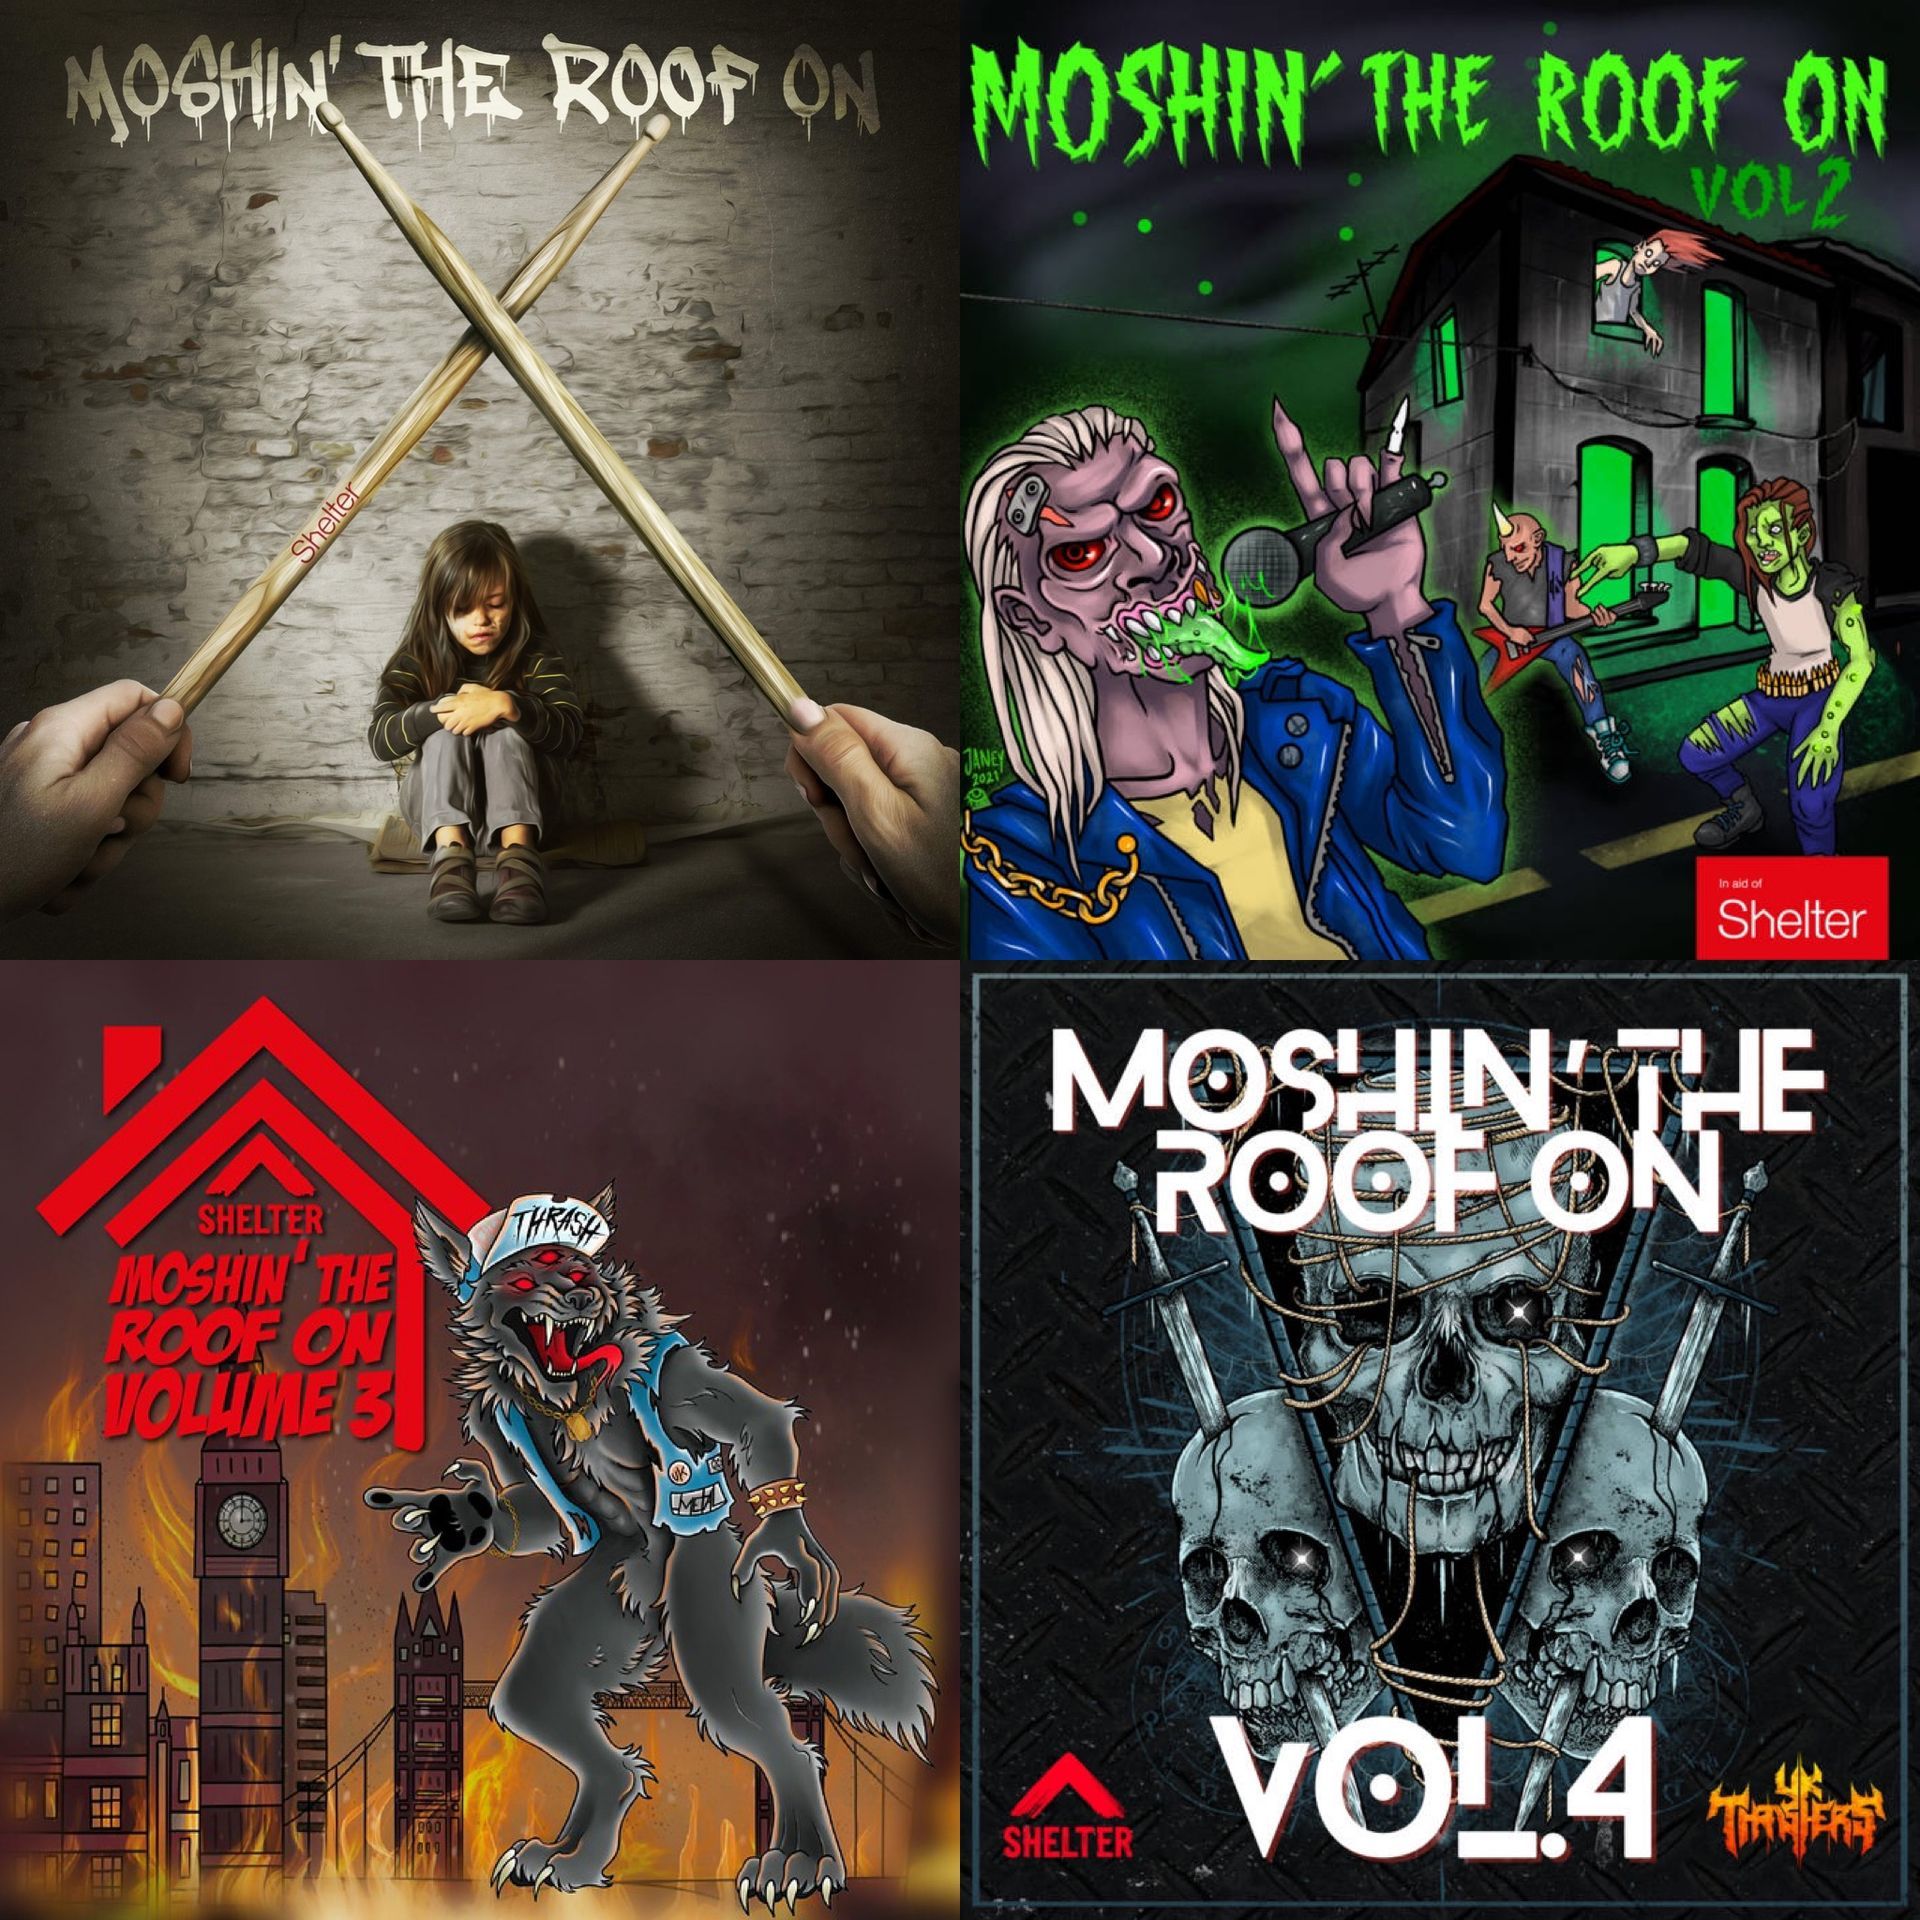 Double Album of UK Thrash Metal in aid of homeless charity Shelter UK